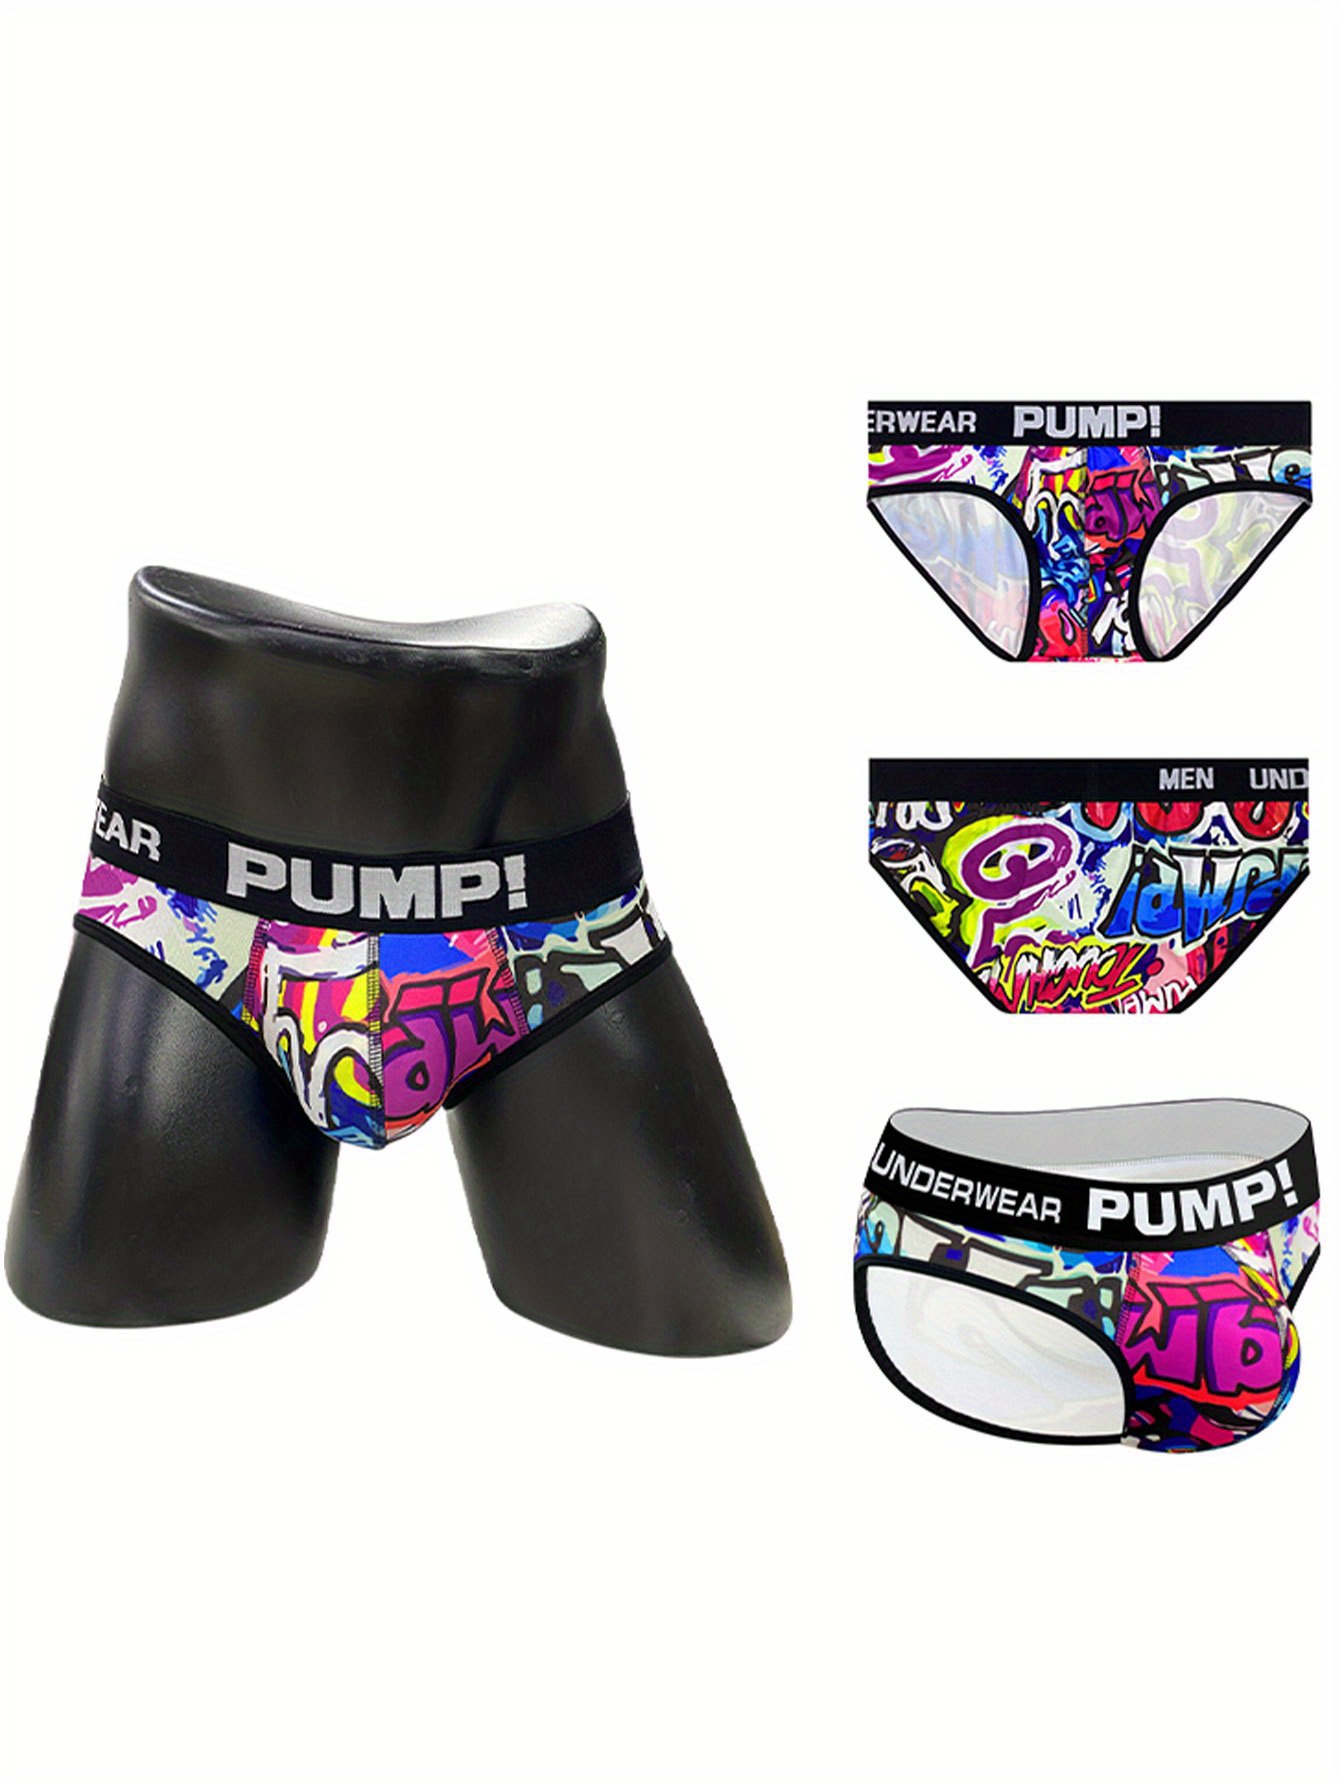 New PUMP Underwear Collection - Fashionably Male